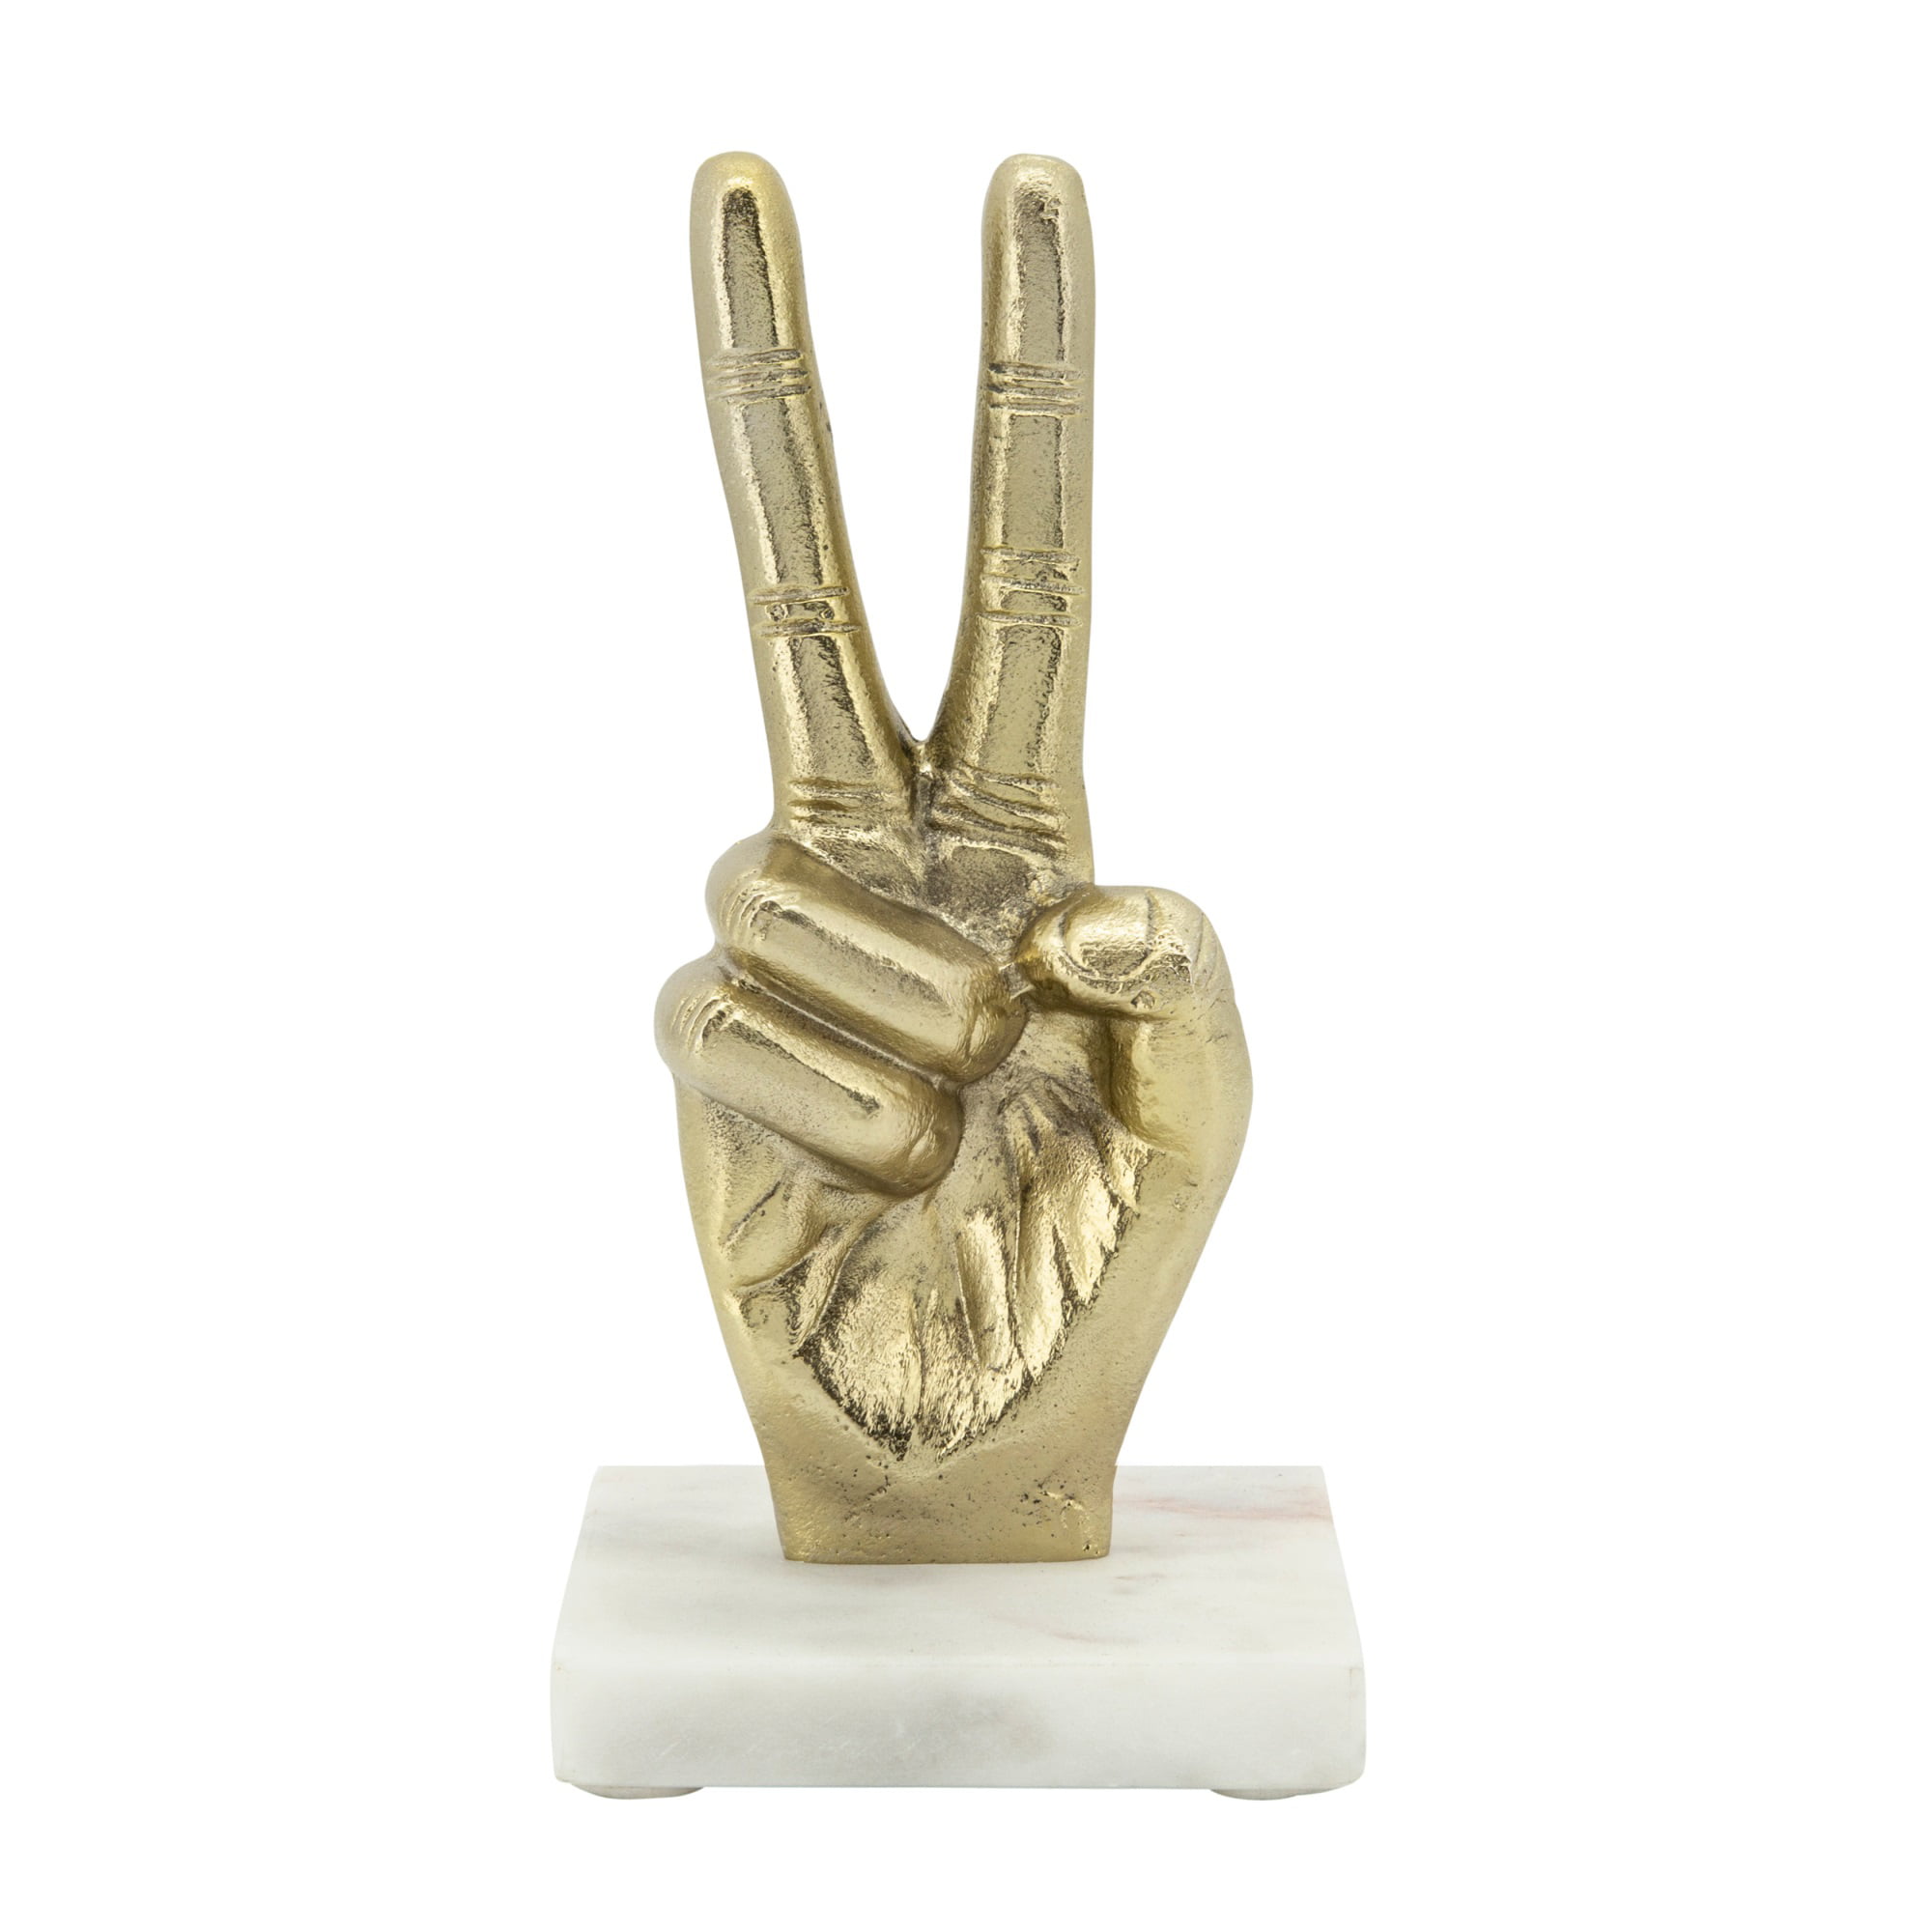 Silver Peace Sign Victory Jewellery Stand Hand Gesture Sculpture Ornament 